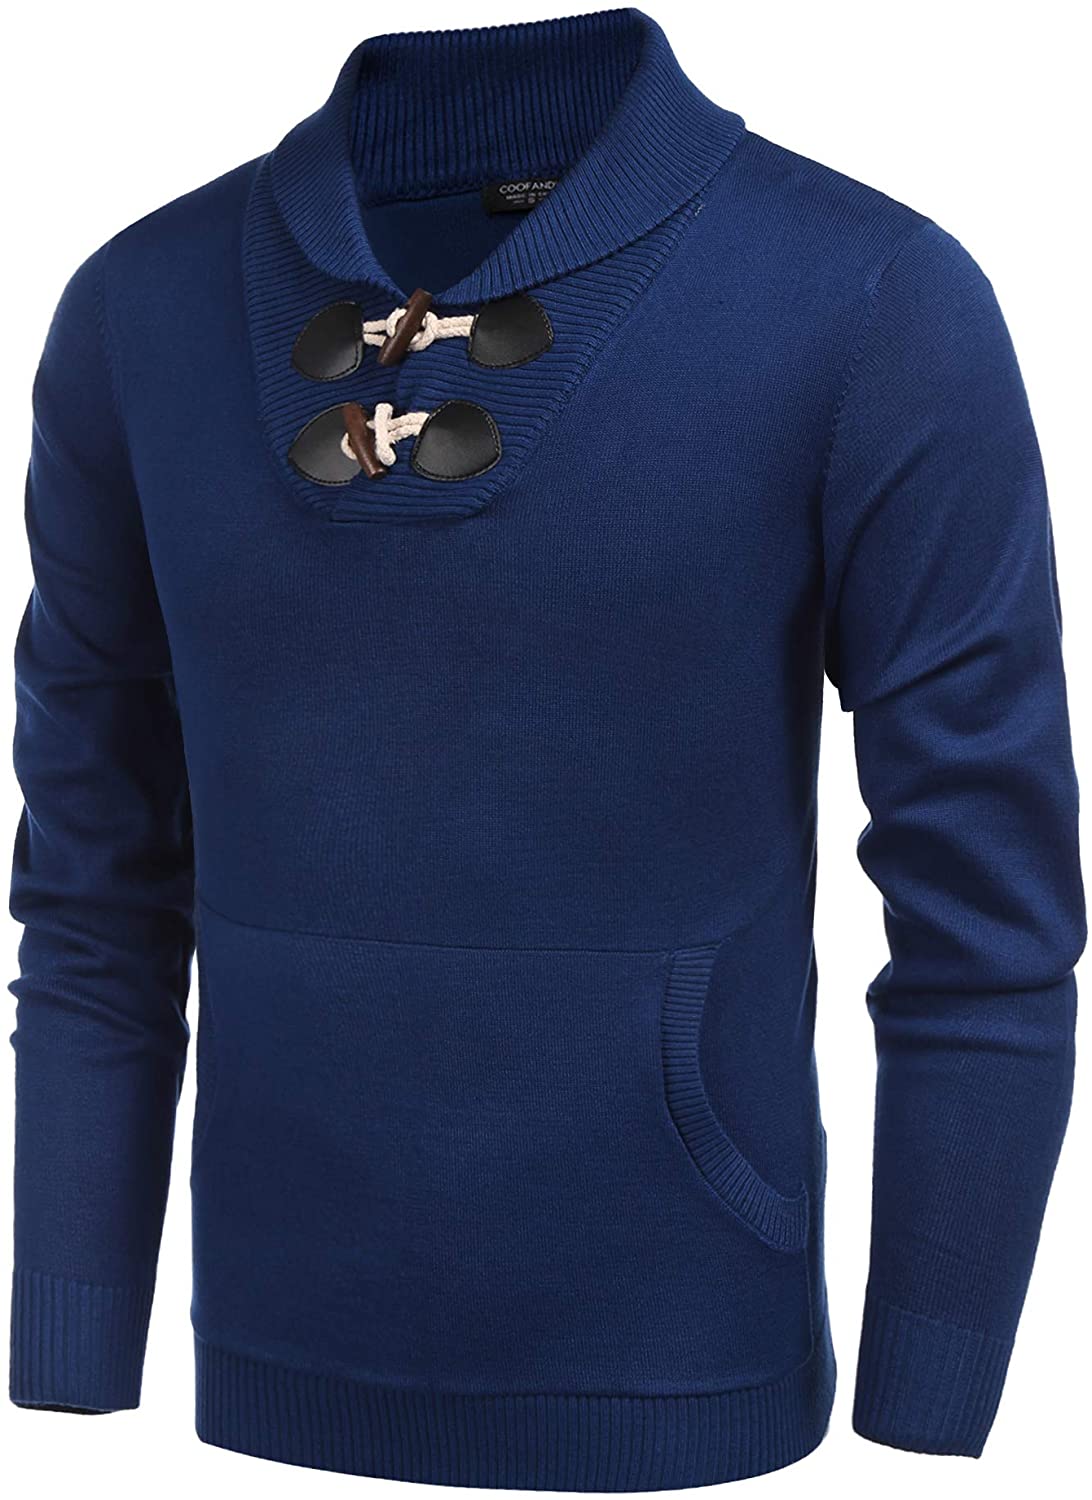 COOFANDY Men's Shawl Collar Pullover Sweater Relaxed Fit Casual Cotton ...